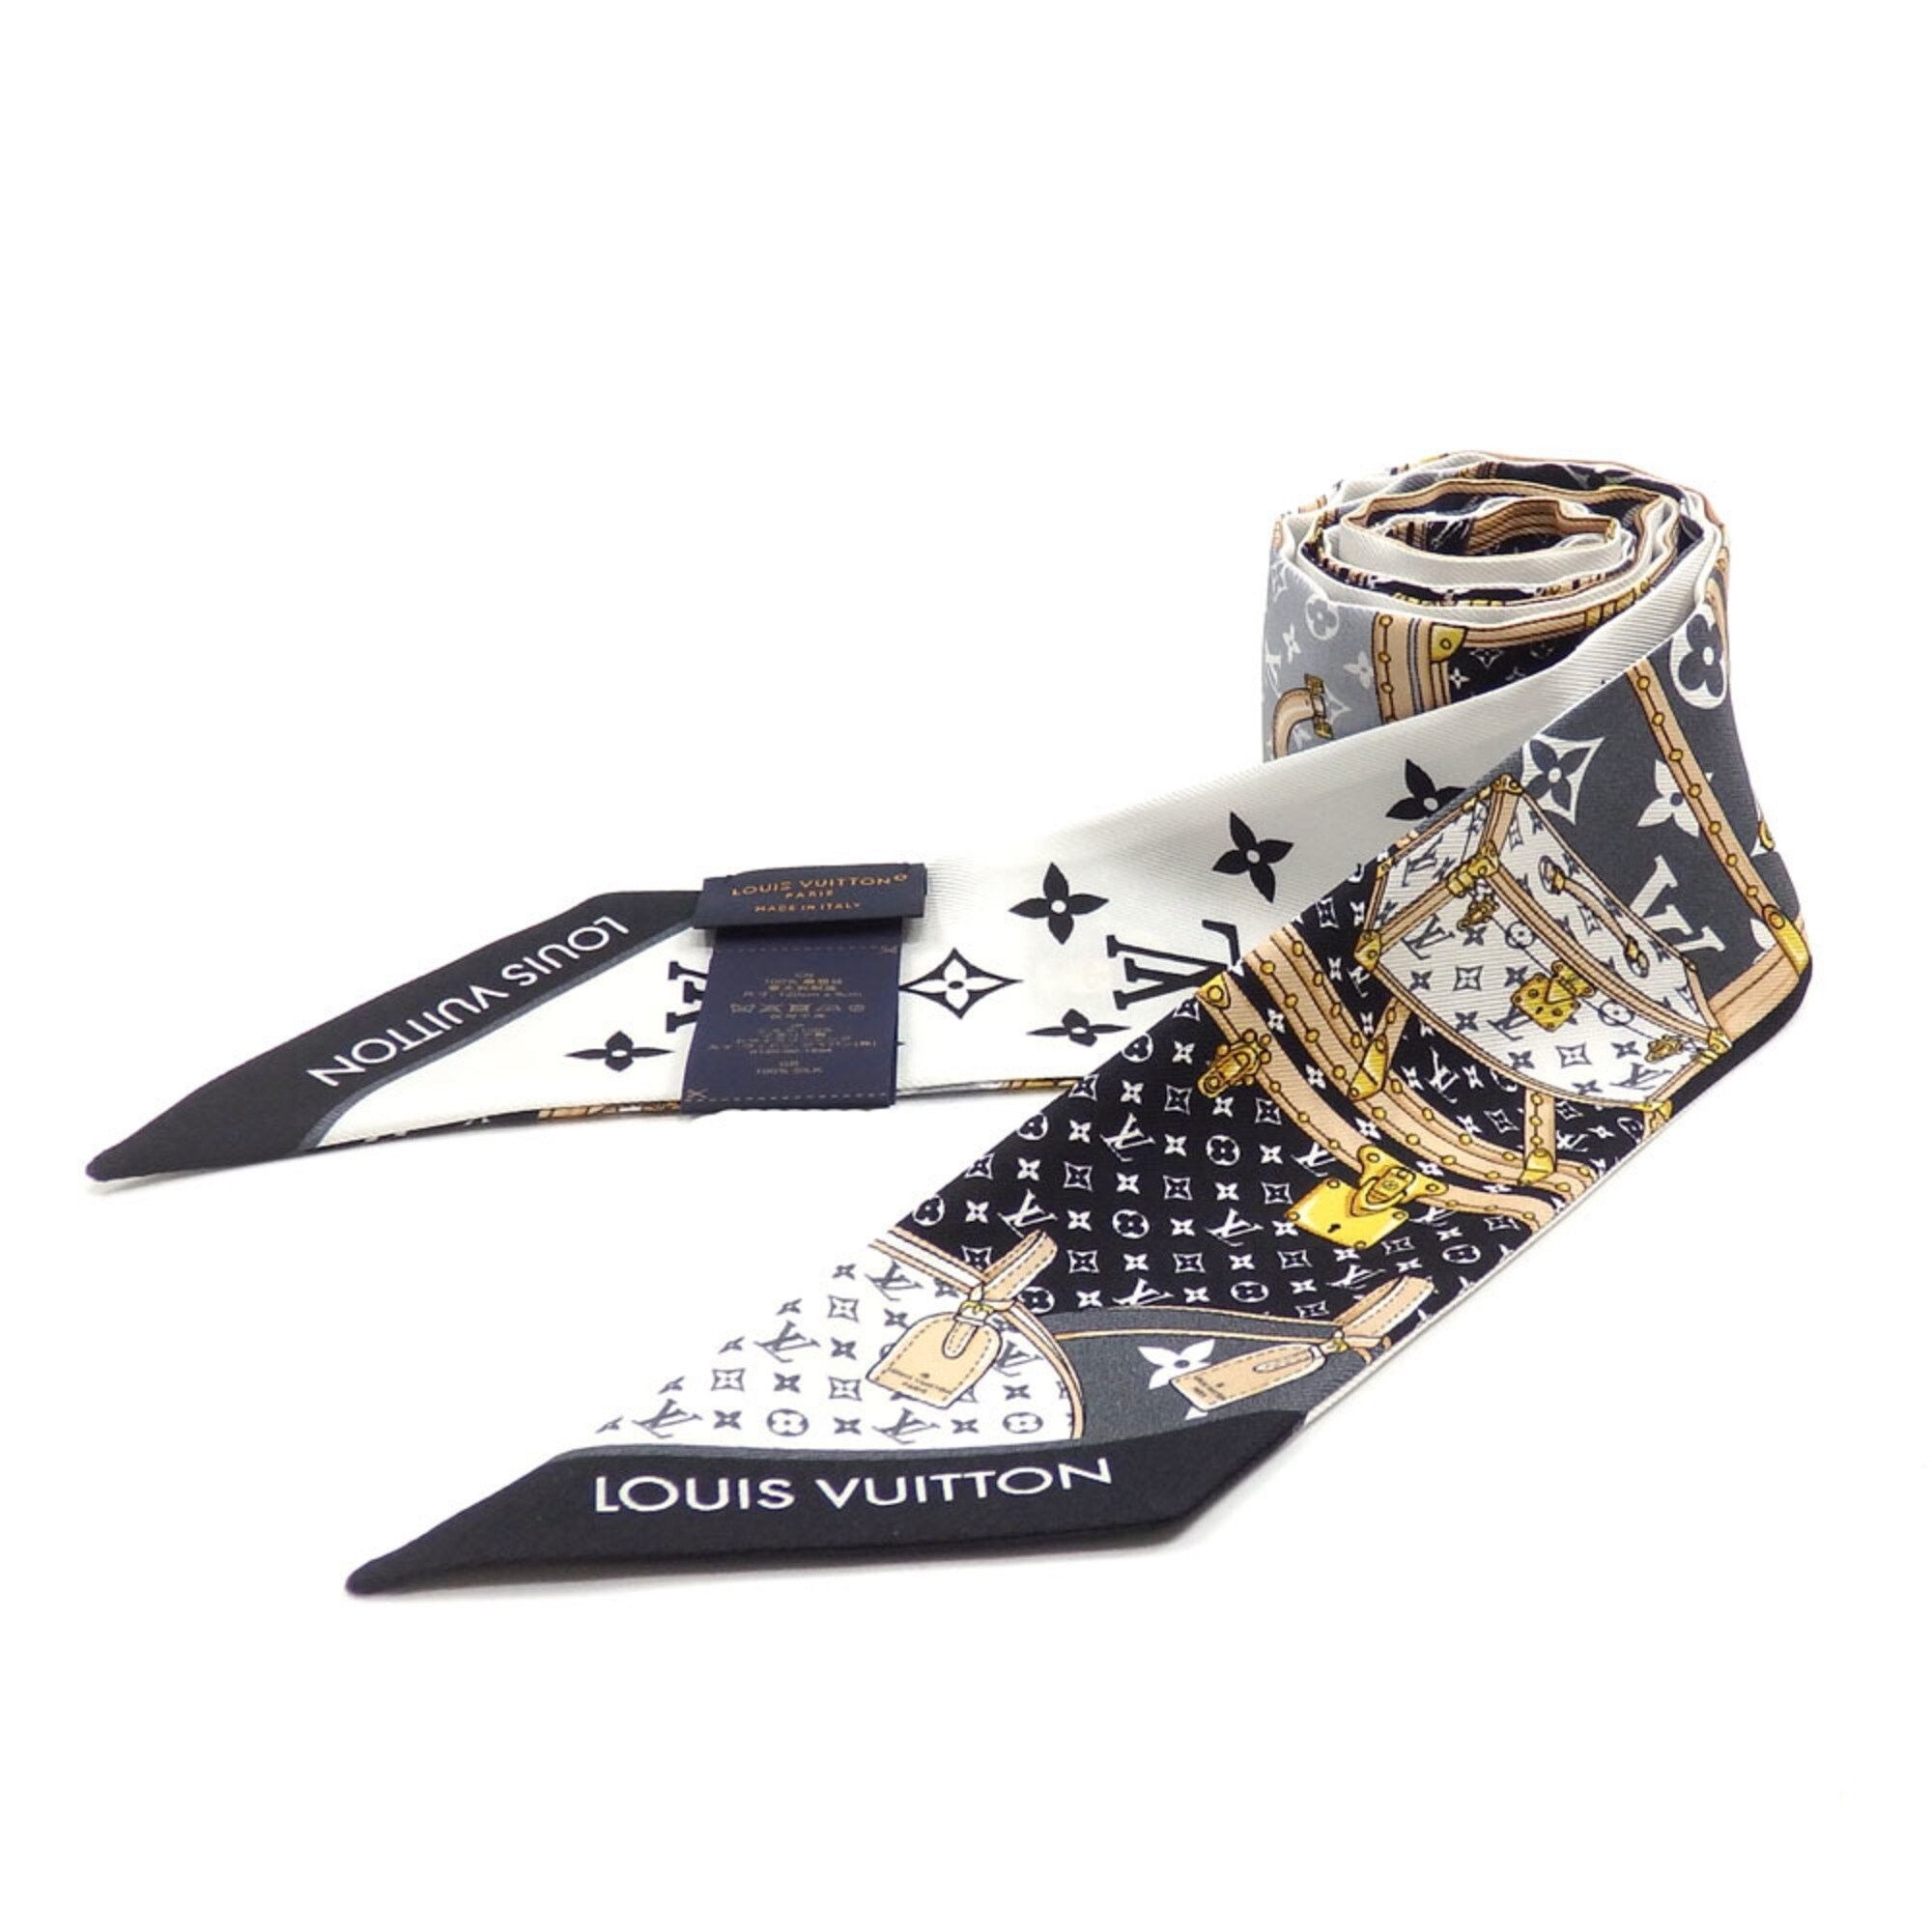 Buy [Used] Louis Vuitton Silk Bandeau BB Let's Go Scarf Scarf M76442 Black/White  Silk Scarf/Muffler M76442 from Japan - Buy authentic Plus exclusive items  from Japan